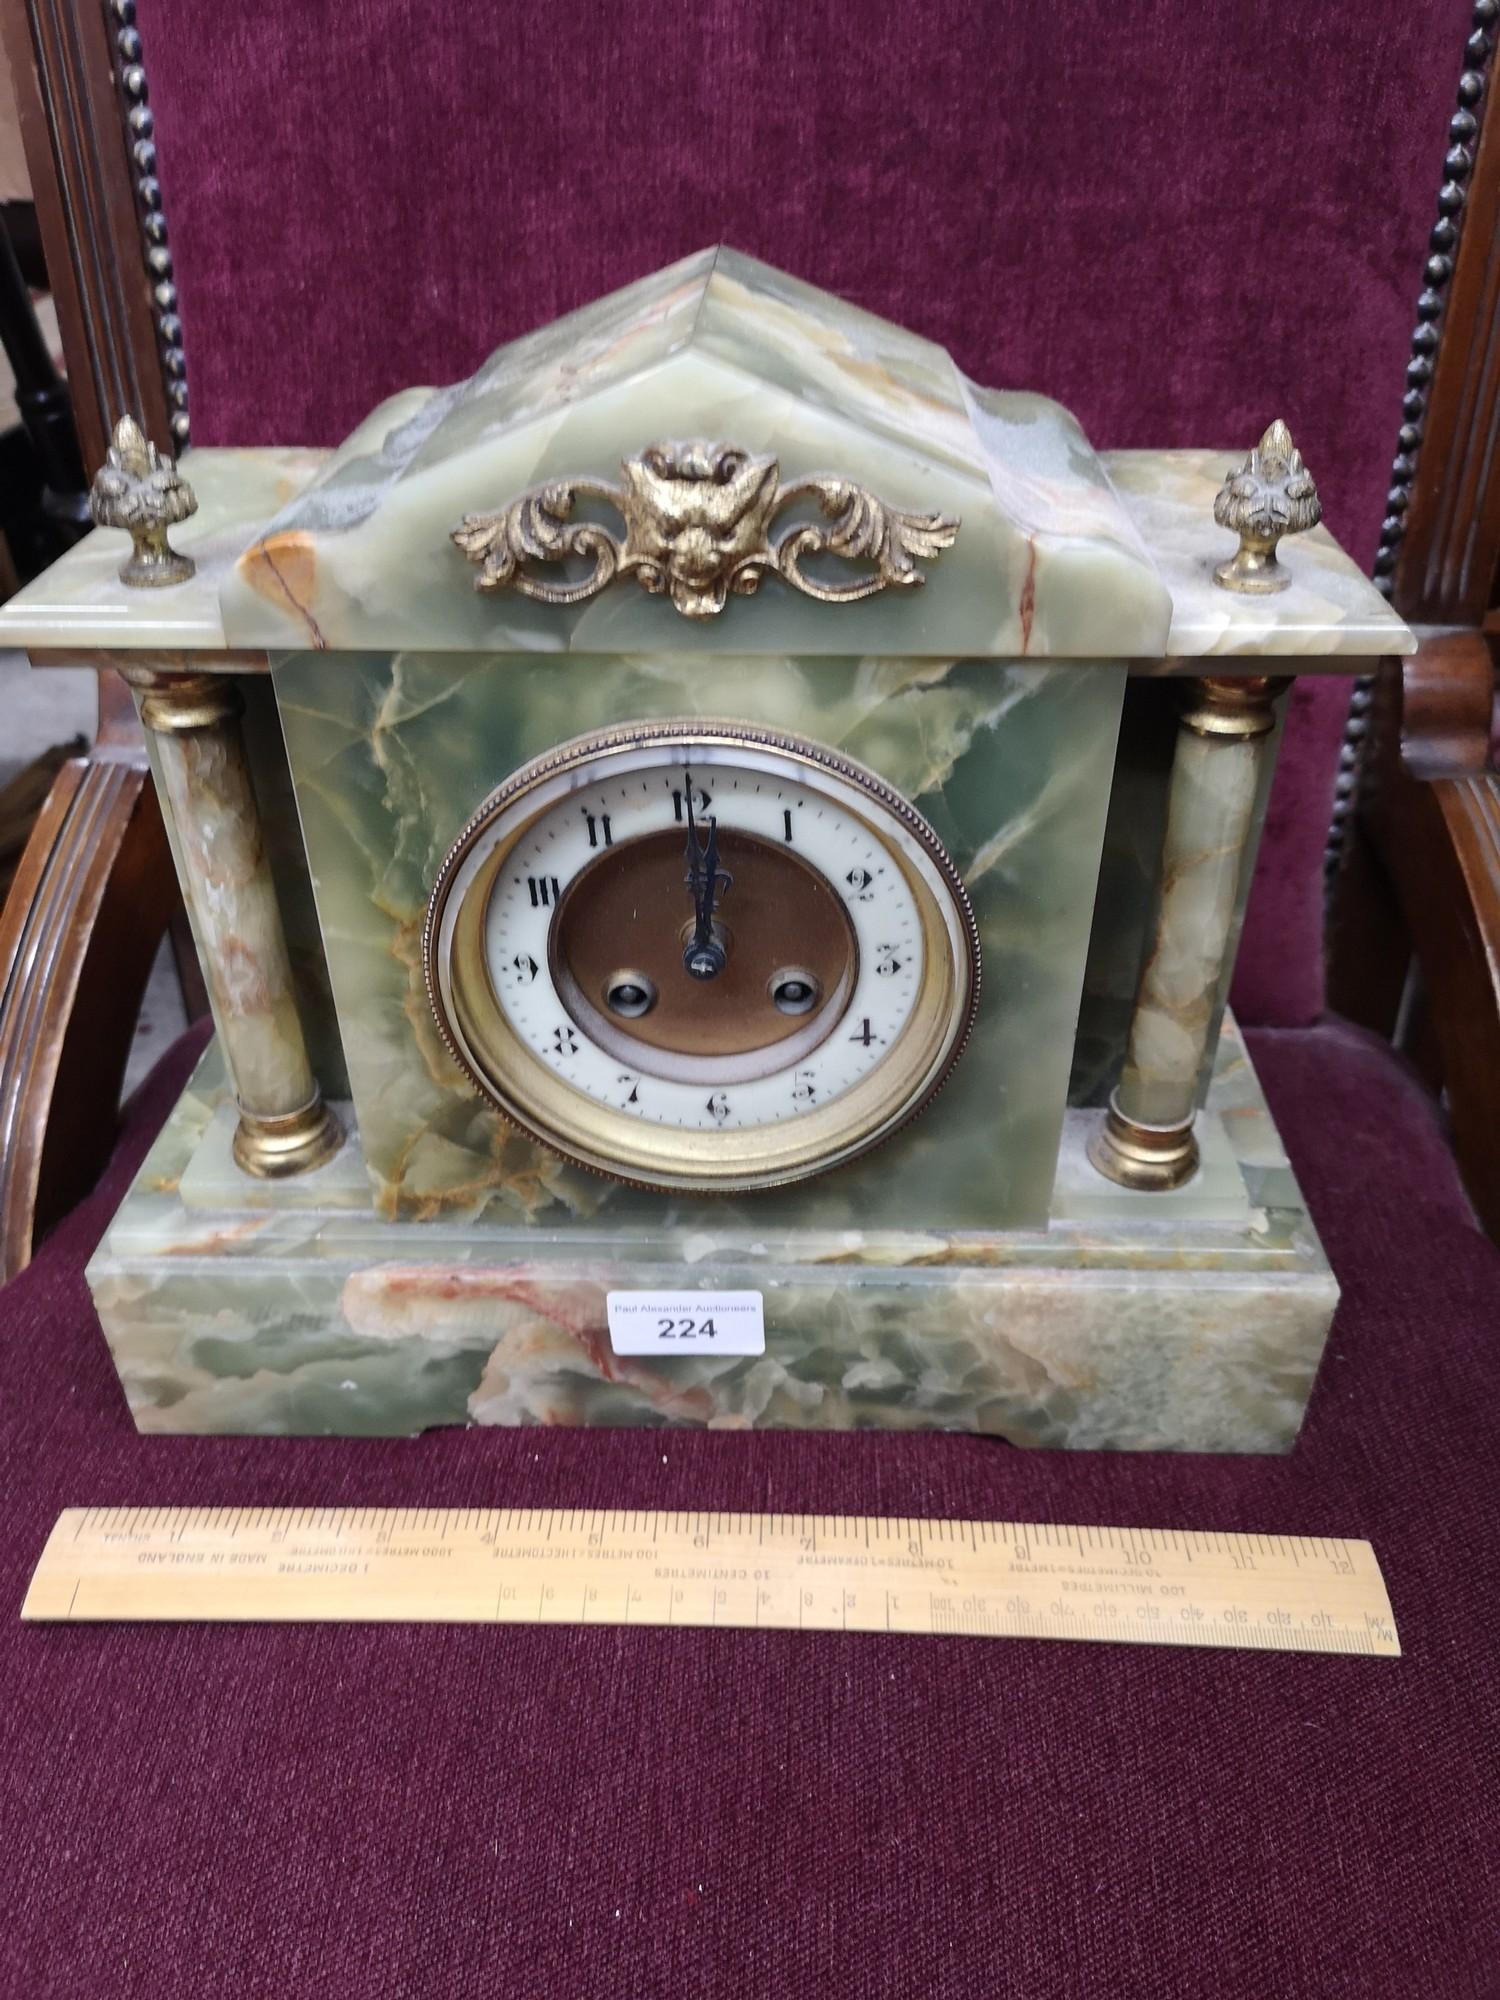 Victorian Jappy Freyas heavy mantle clock with pendulum in working order - Image 2 of 5